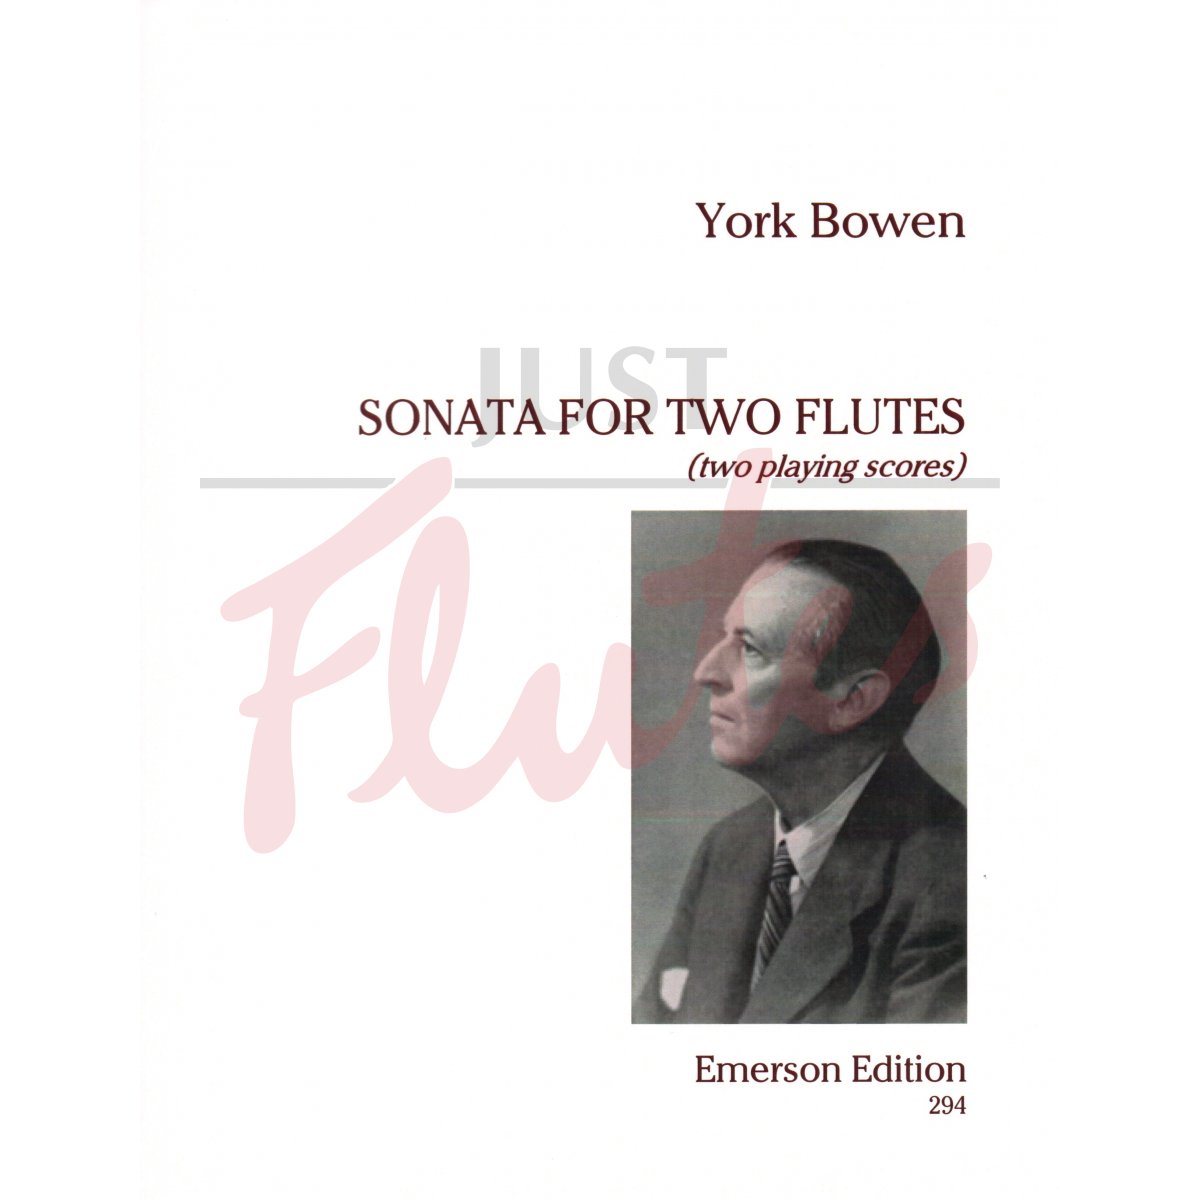 Sonata for Two Flutes